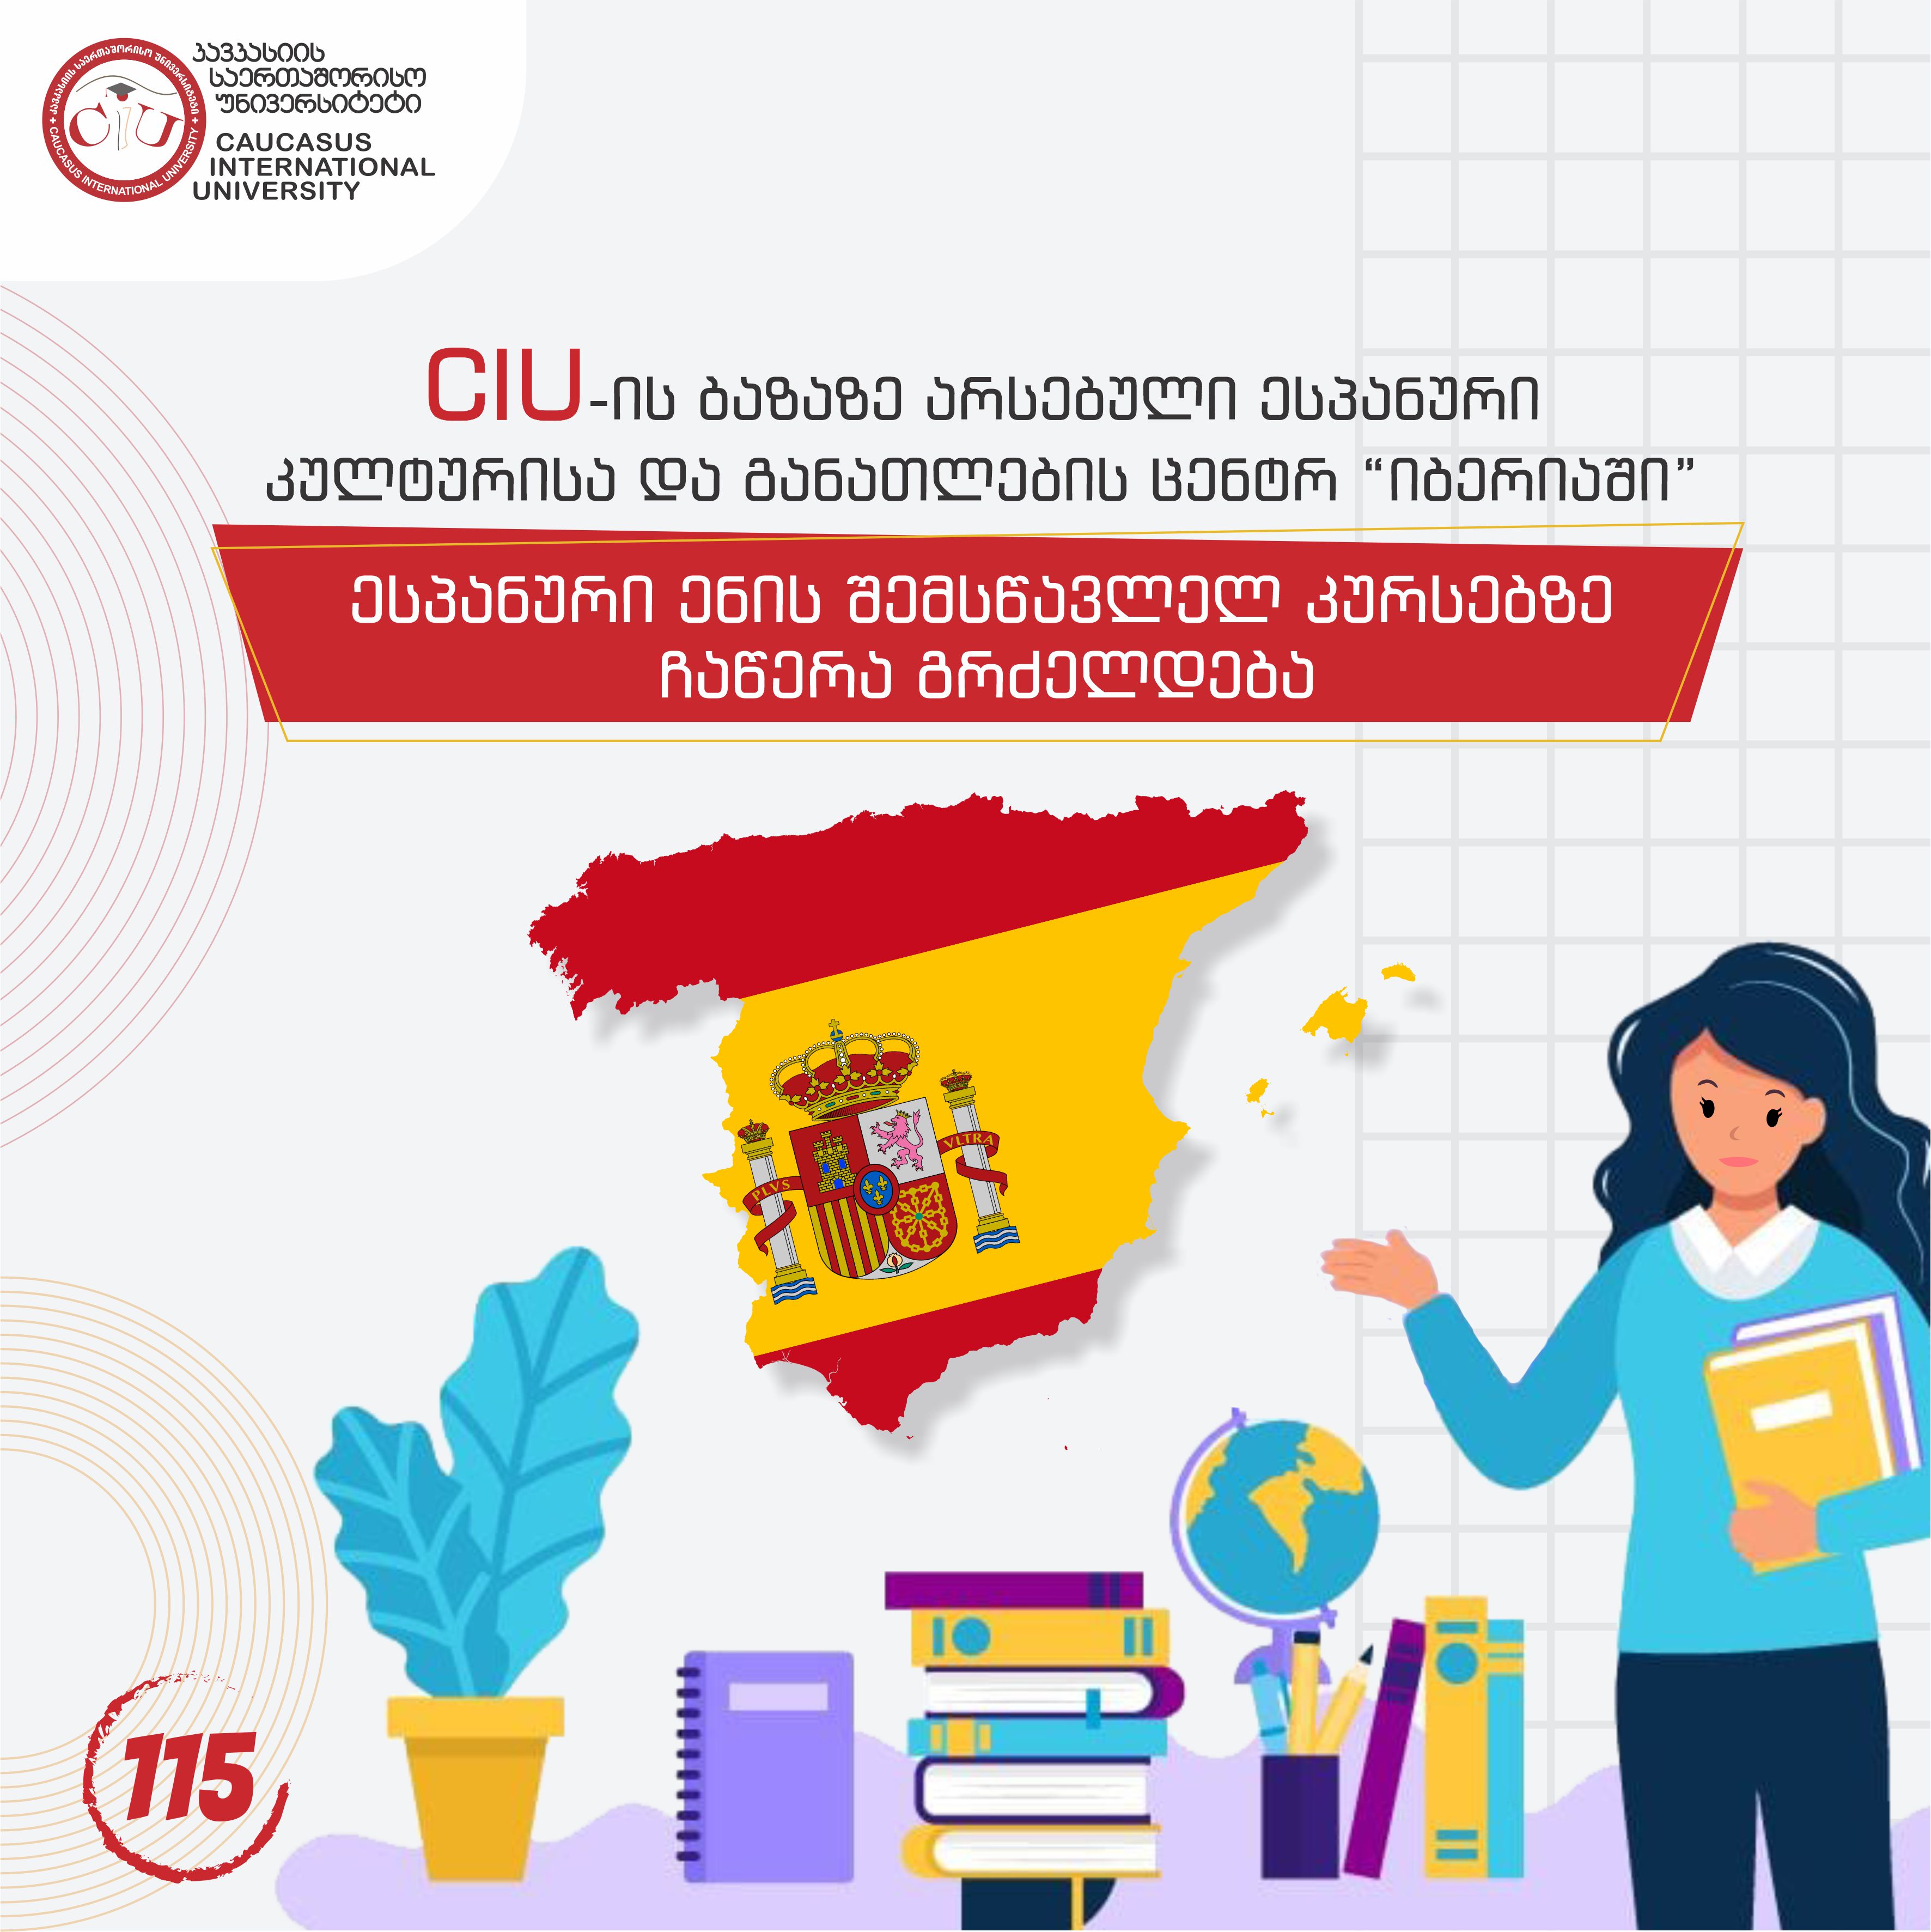 Registration for Spanish Language Courses Offered by CIU Based Spanish Culture and Education Center “Iberia” Continues